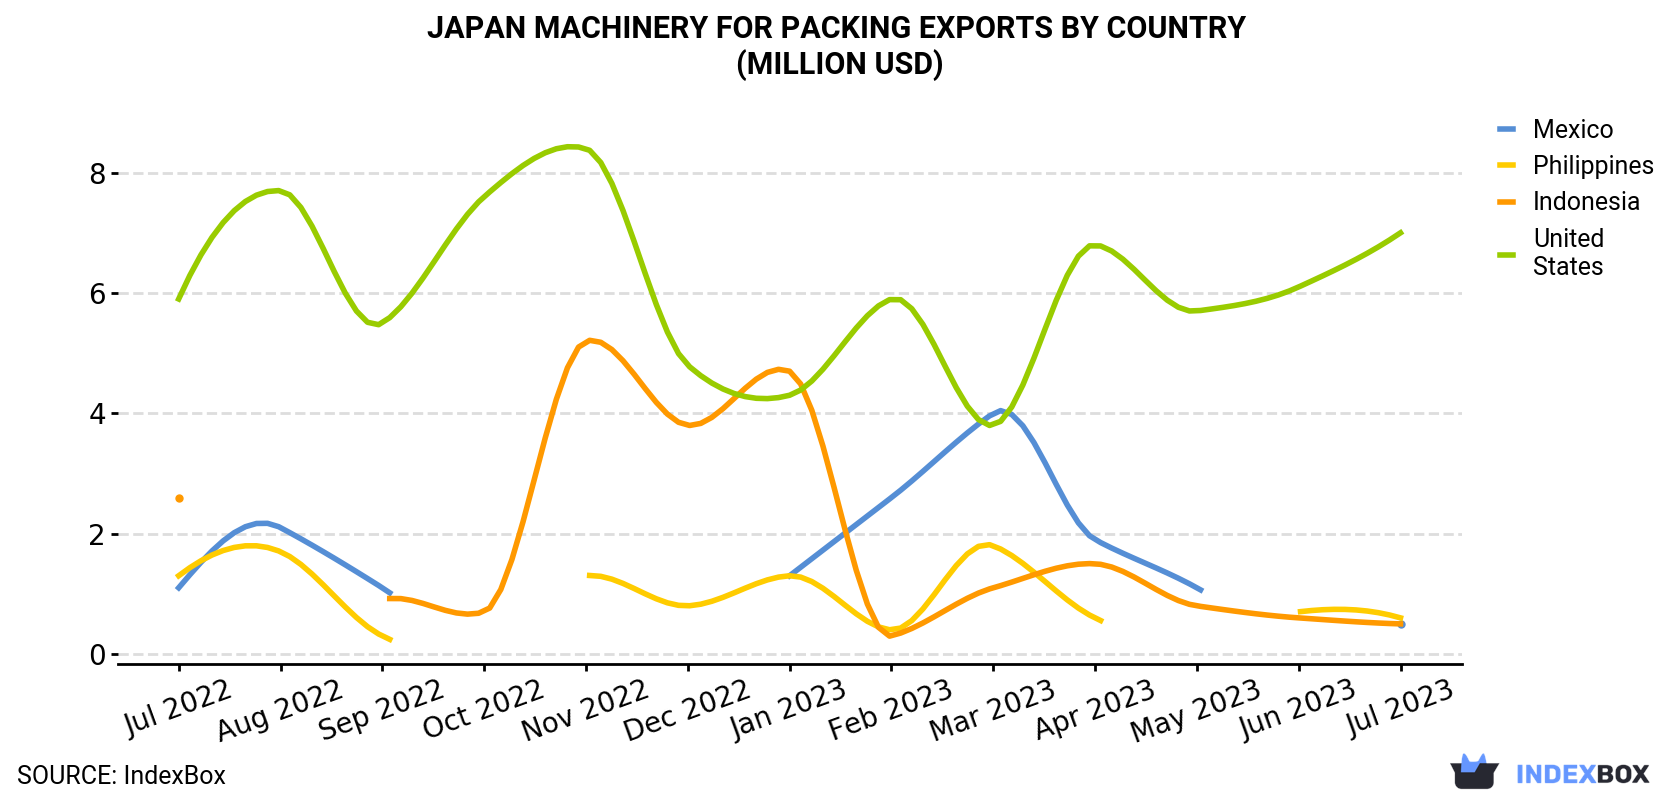 Japan Machinery For Packing Exports By Country (Million USD)